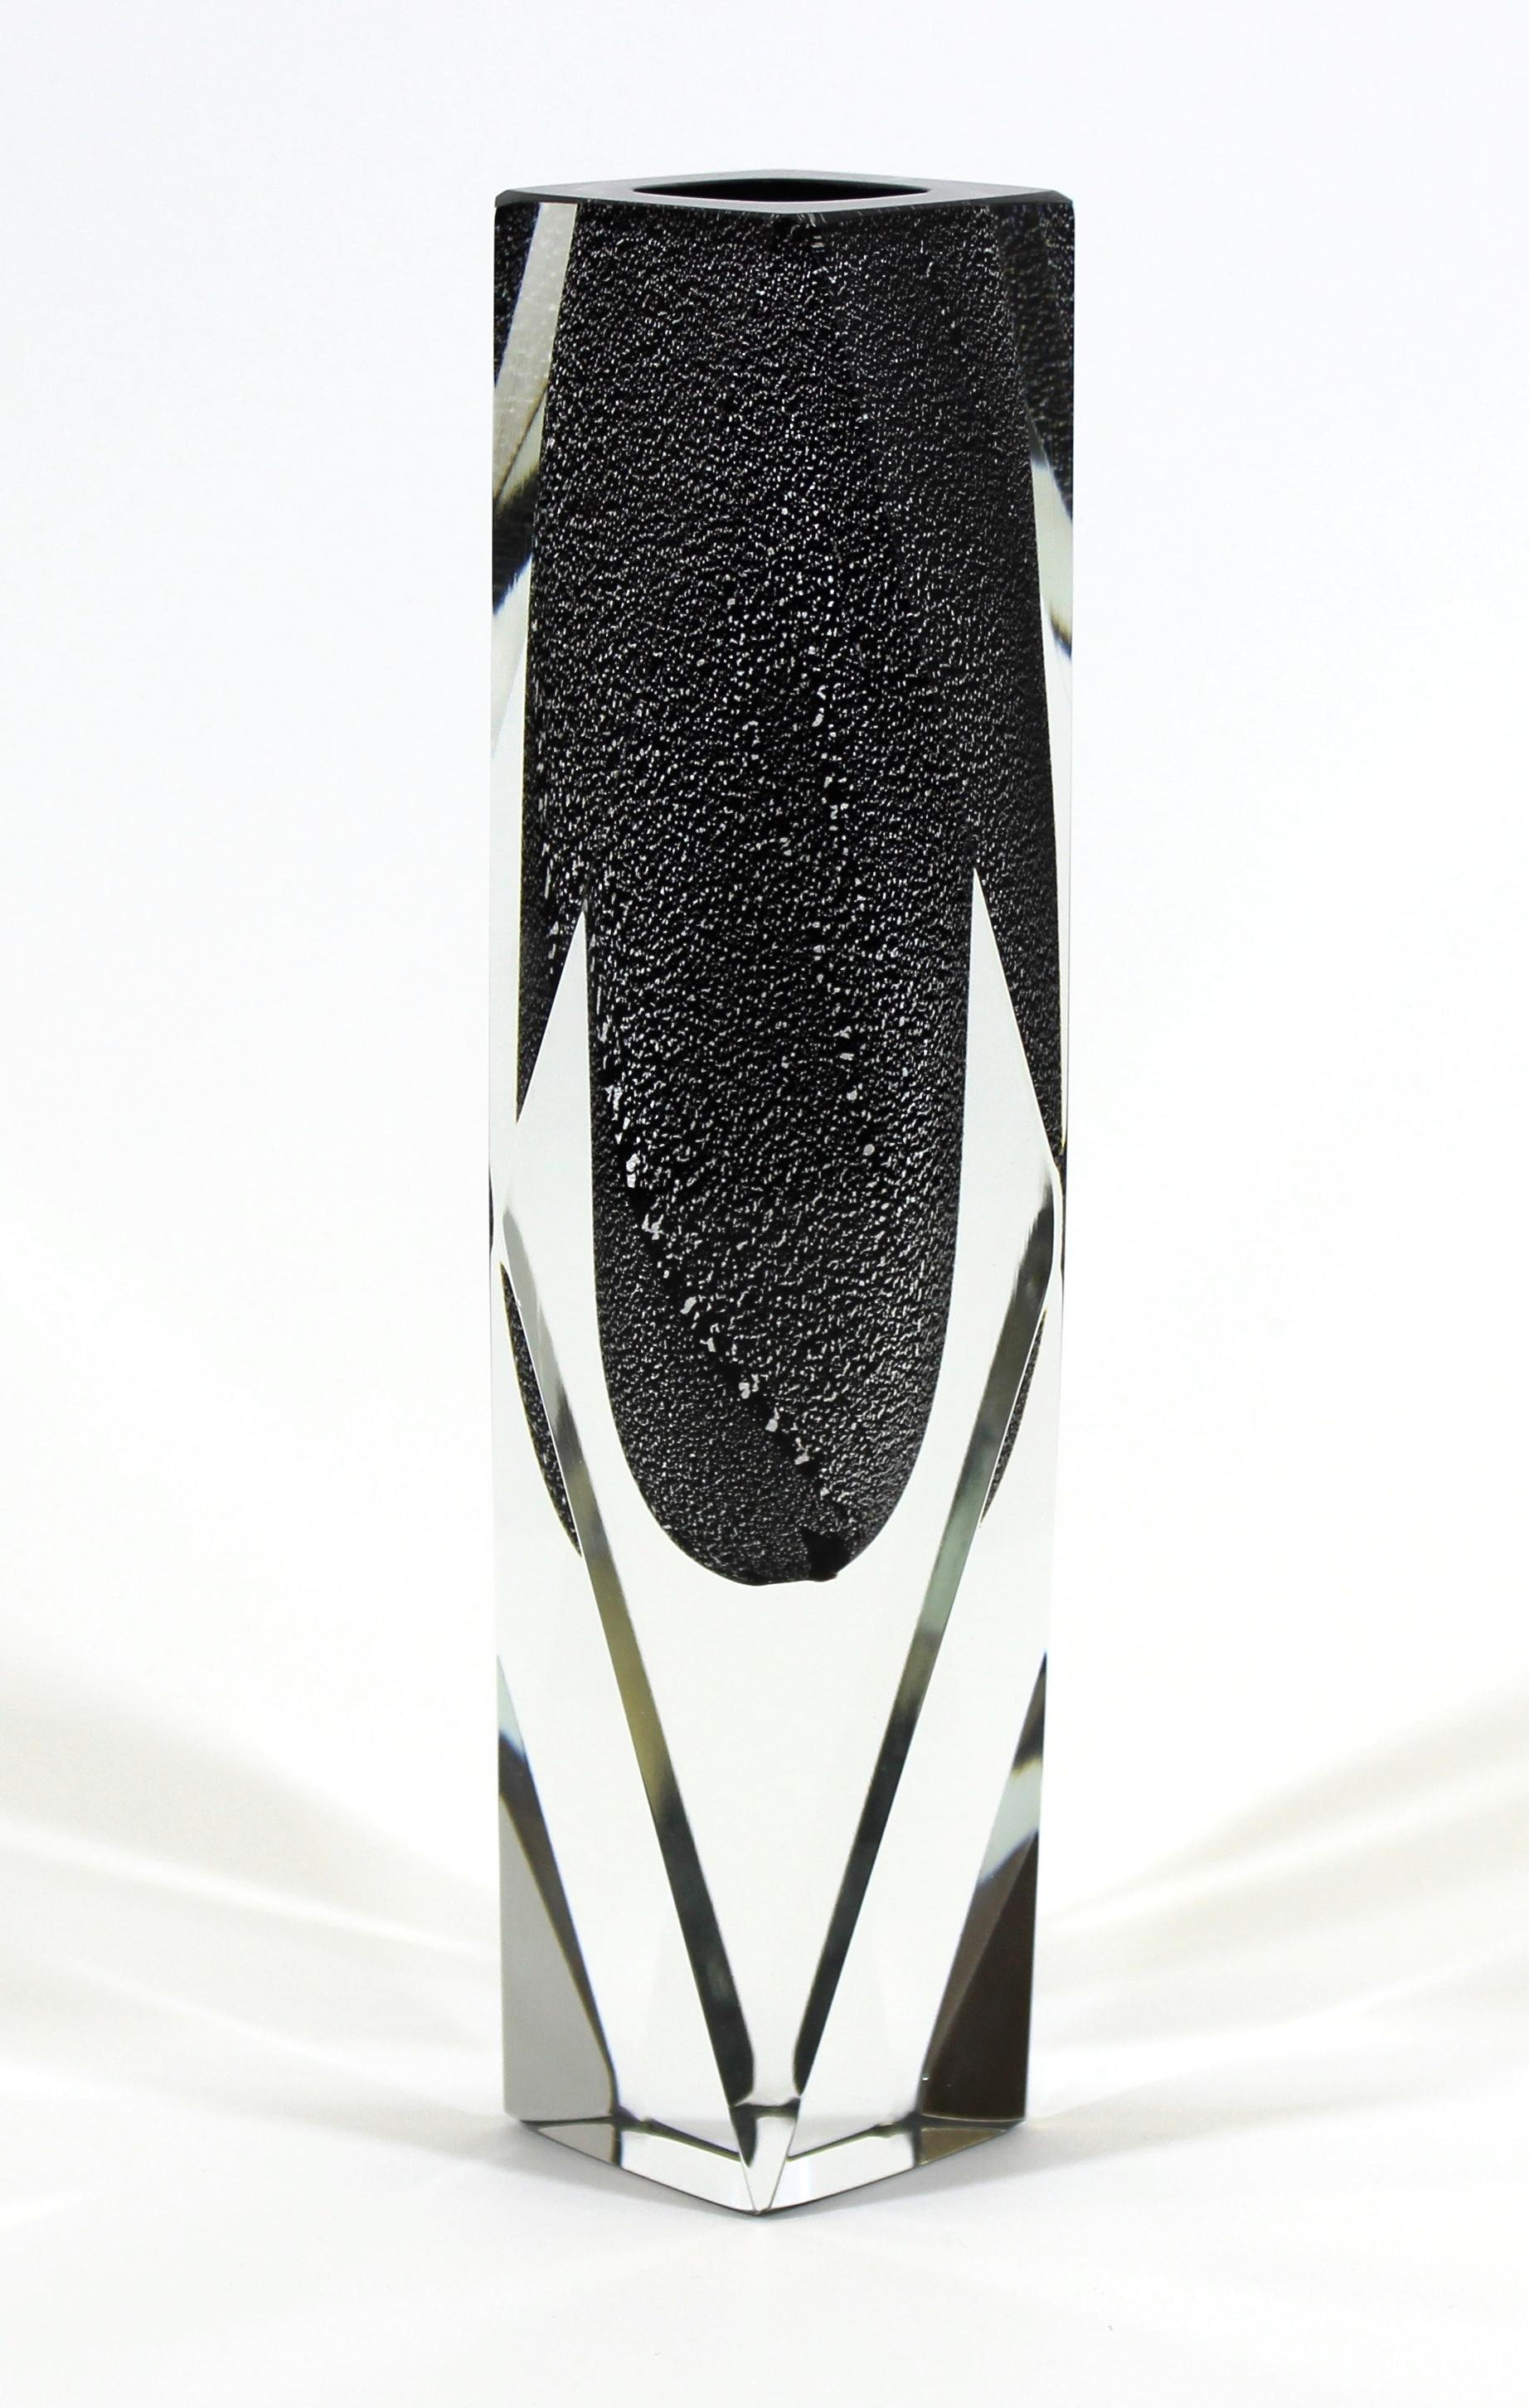 Italian modern black and silver flecked glass vase made with the sommerso technique by Mandruzzato in Murano. In great vintage condition with age-appropriate wear.